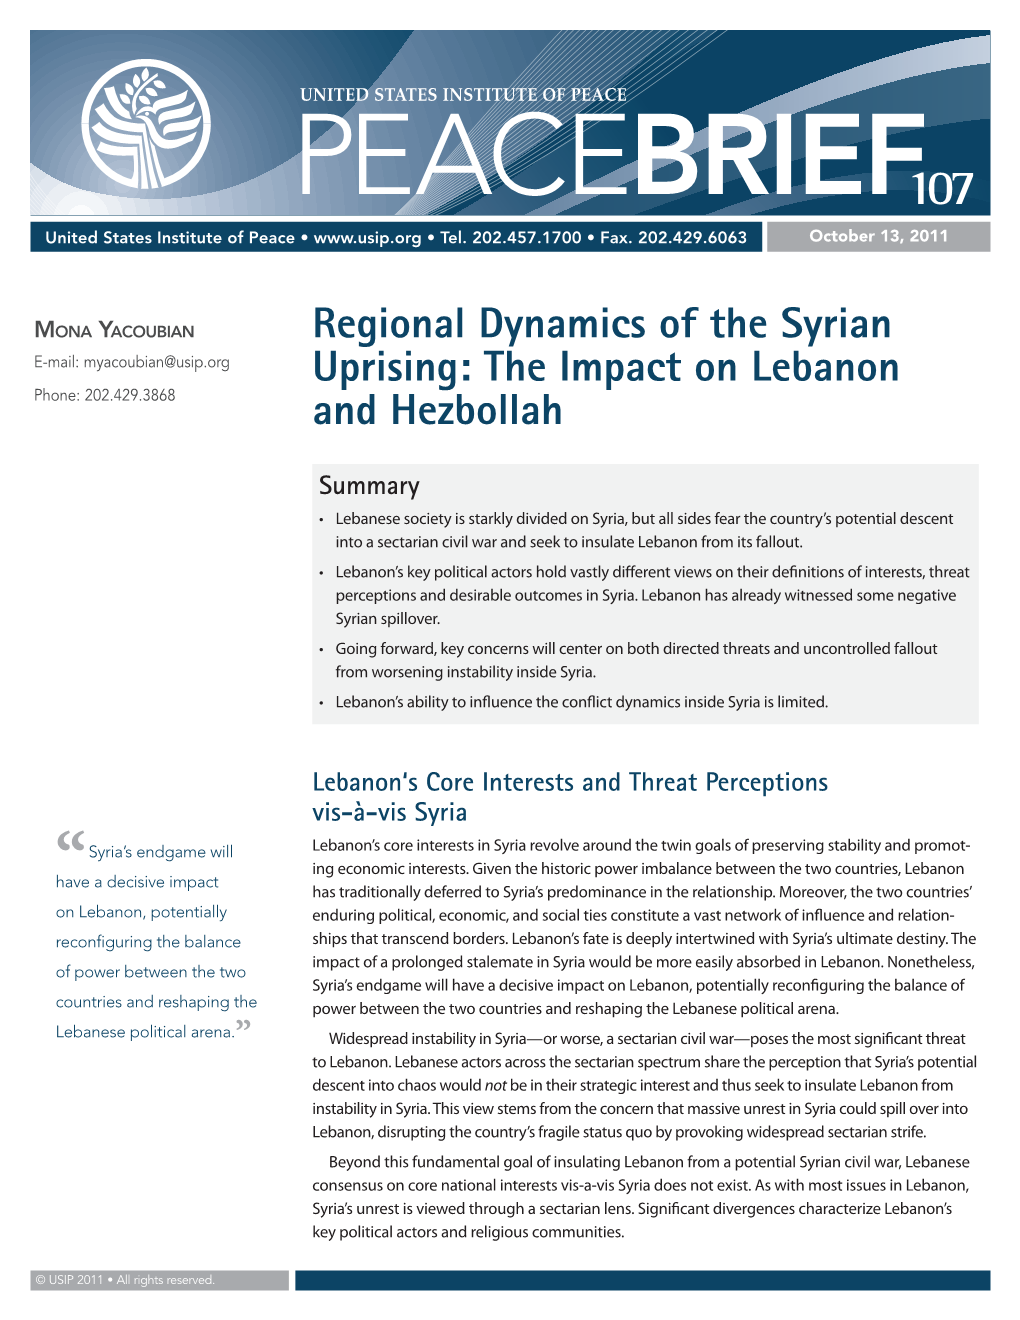 Regional Dynamics of the Syrian Uprising: the Impact on Lebanon and Hezbollah Page 2 • PB 107 • October 13, 2011